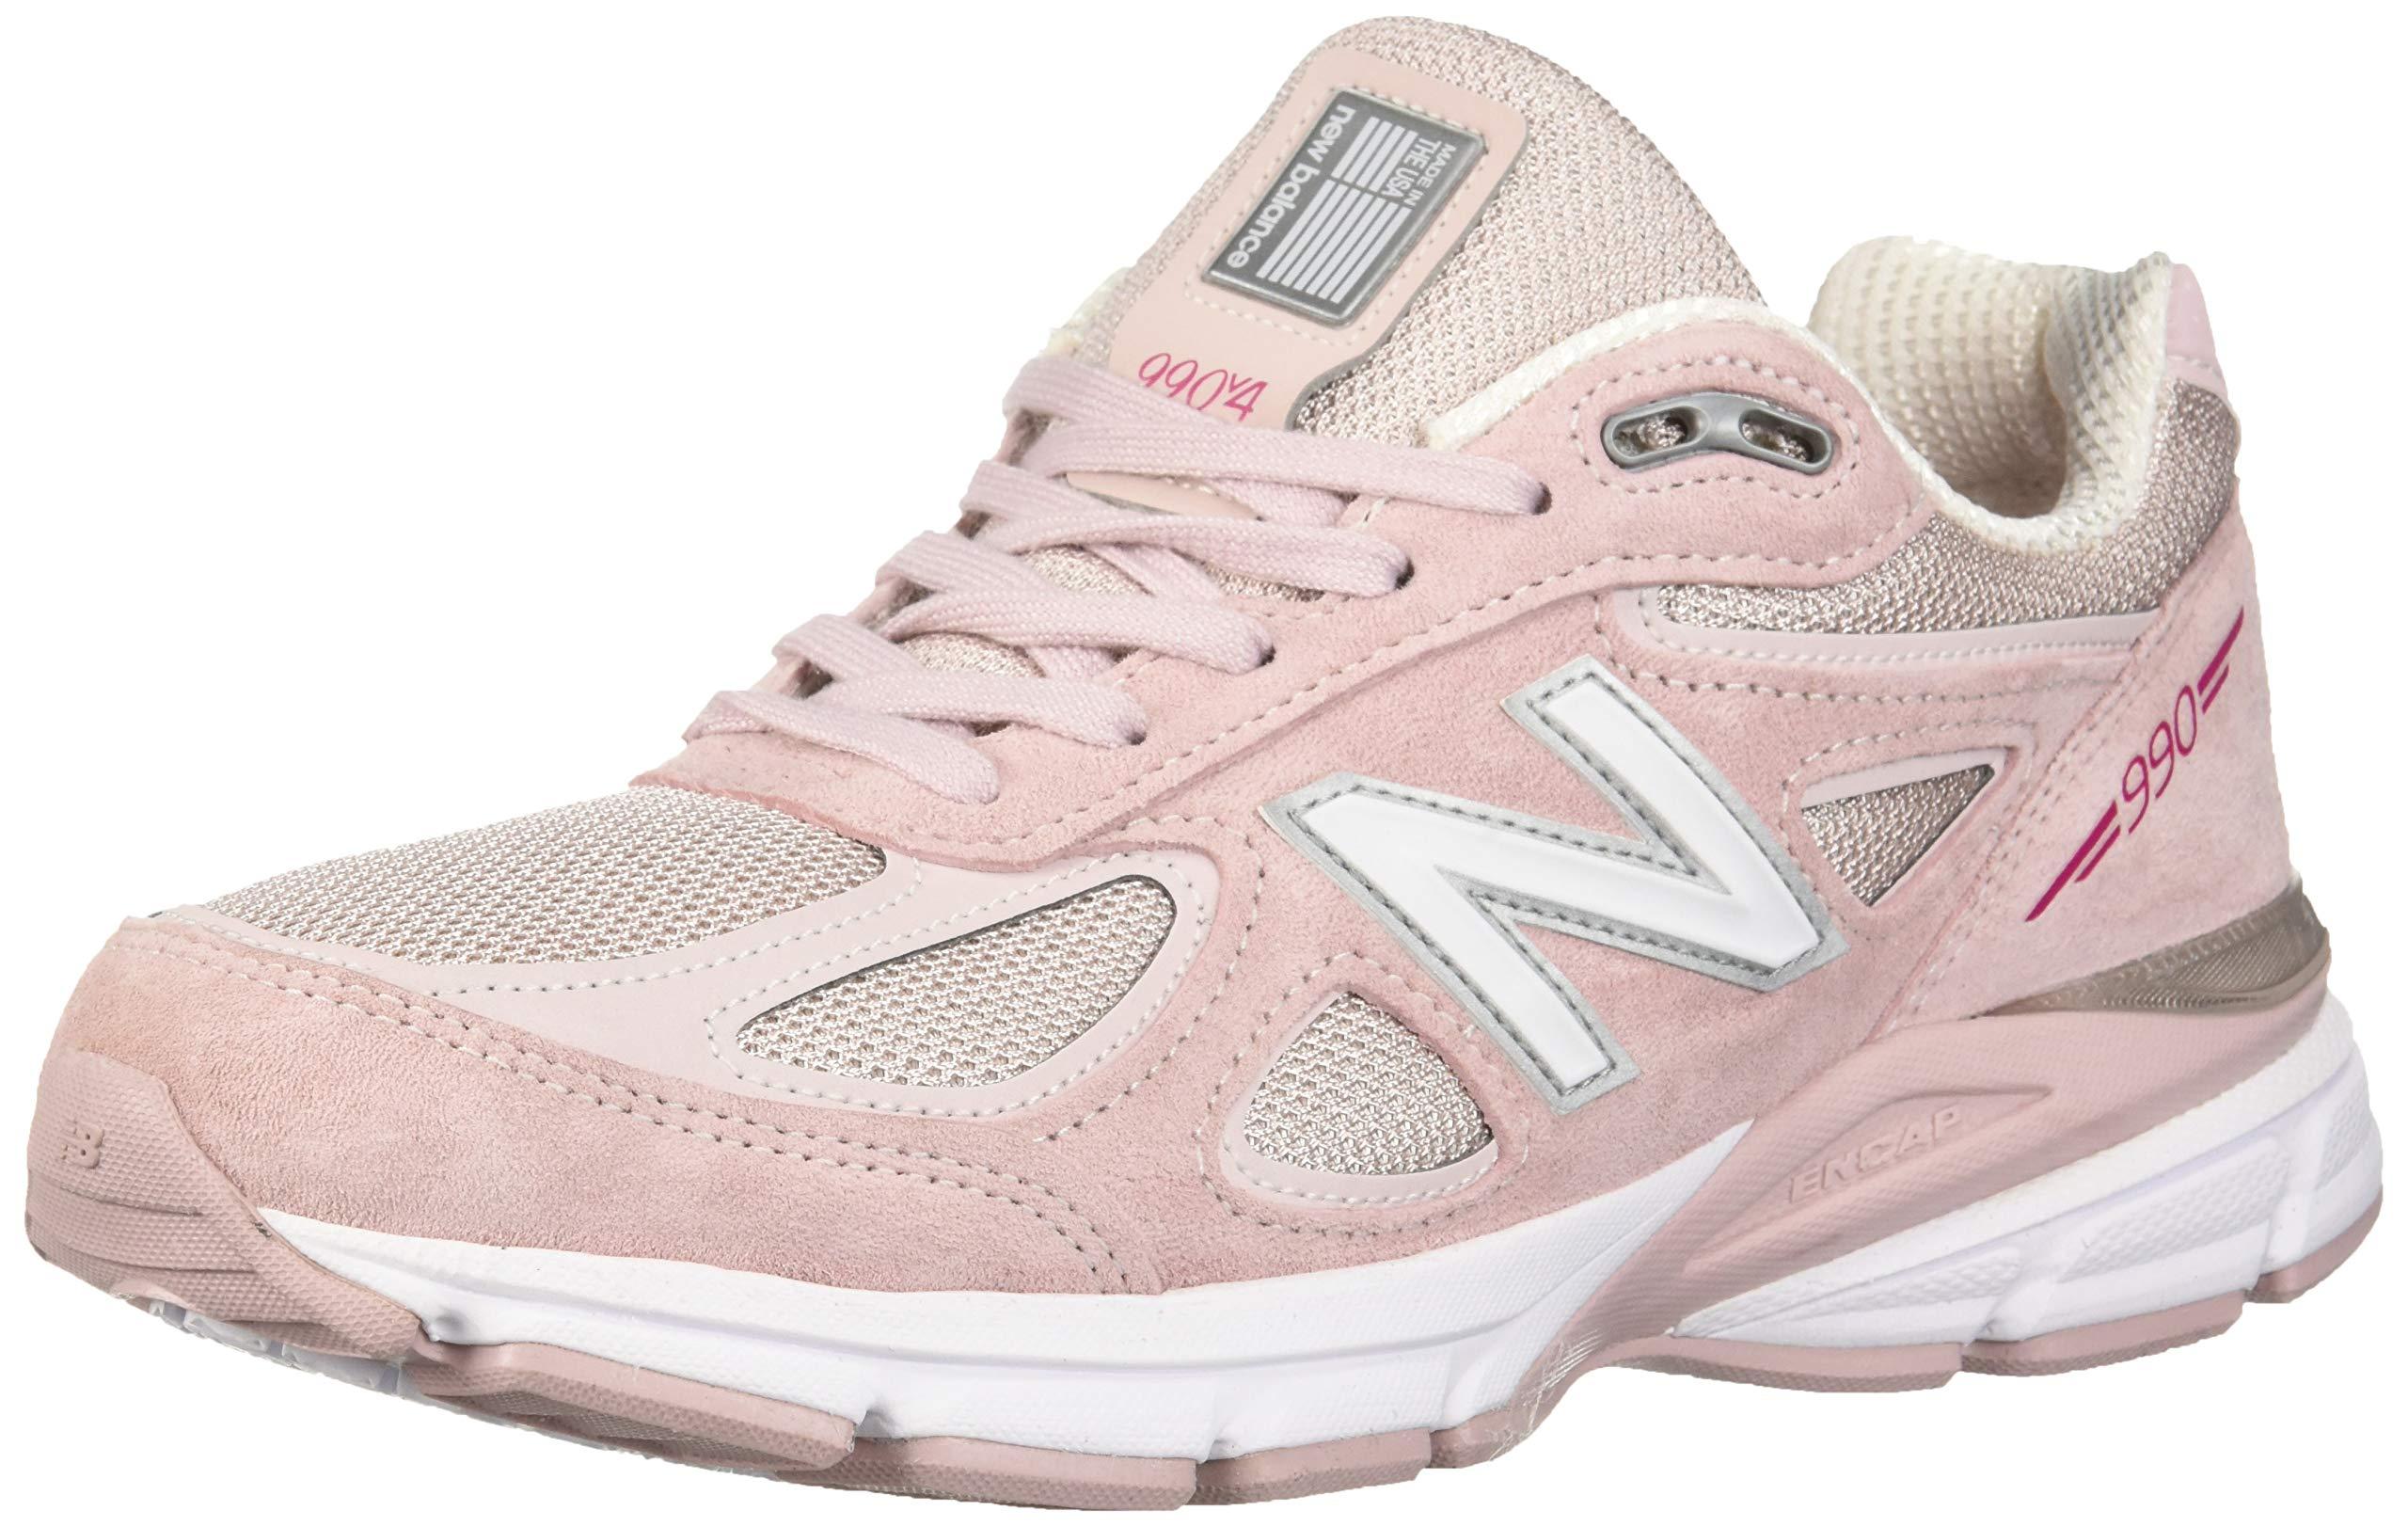 New Balance Made 990 V4 Sneaker in Pink for Men - Save 21% | Lyst